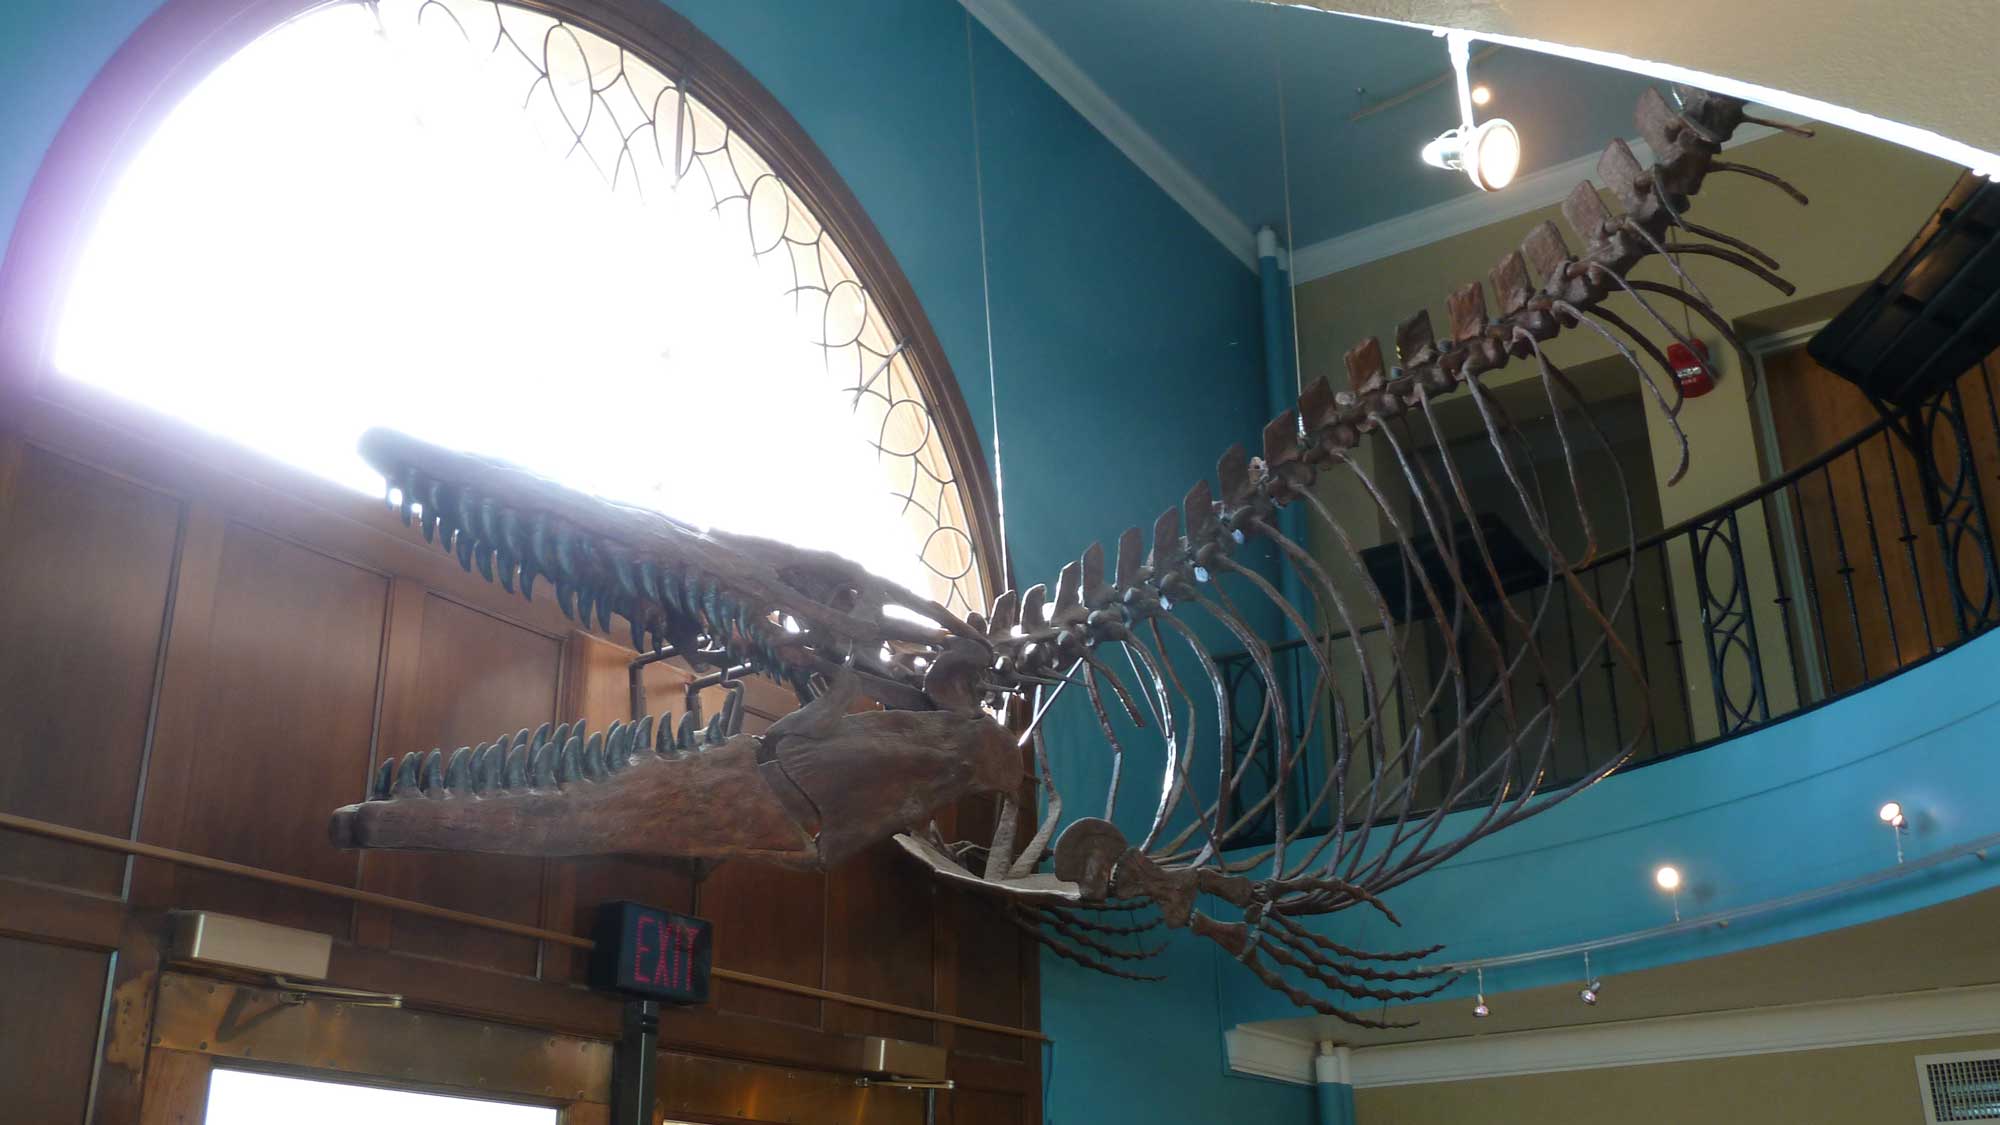 Photograph of a skeleton of Tylosaurus on display at the University of Kansas Museum of Natural History in Lawrence, Kansas.